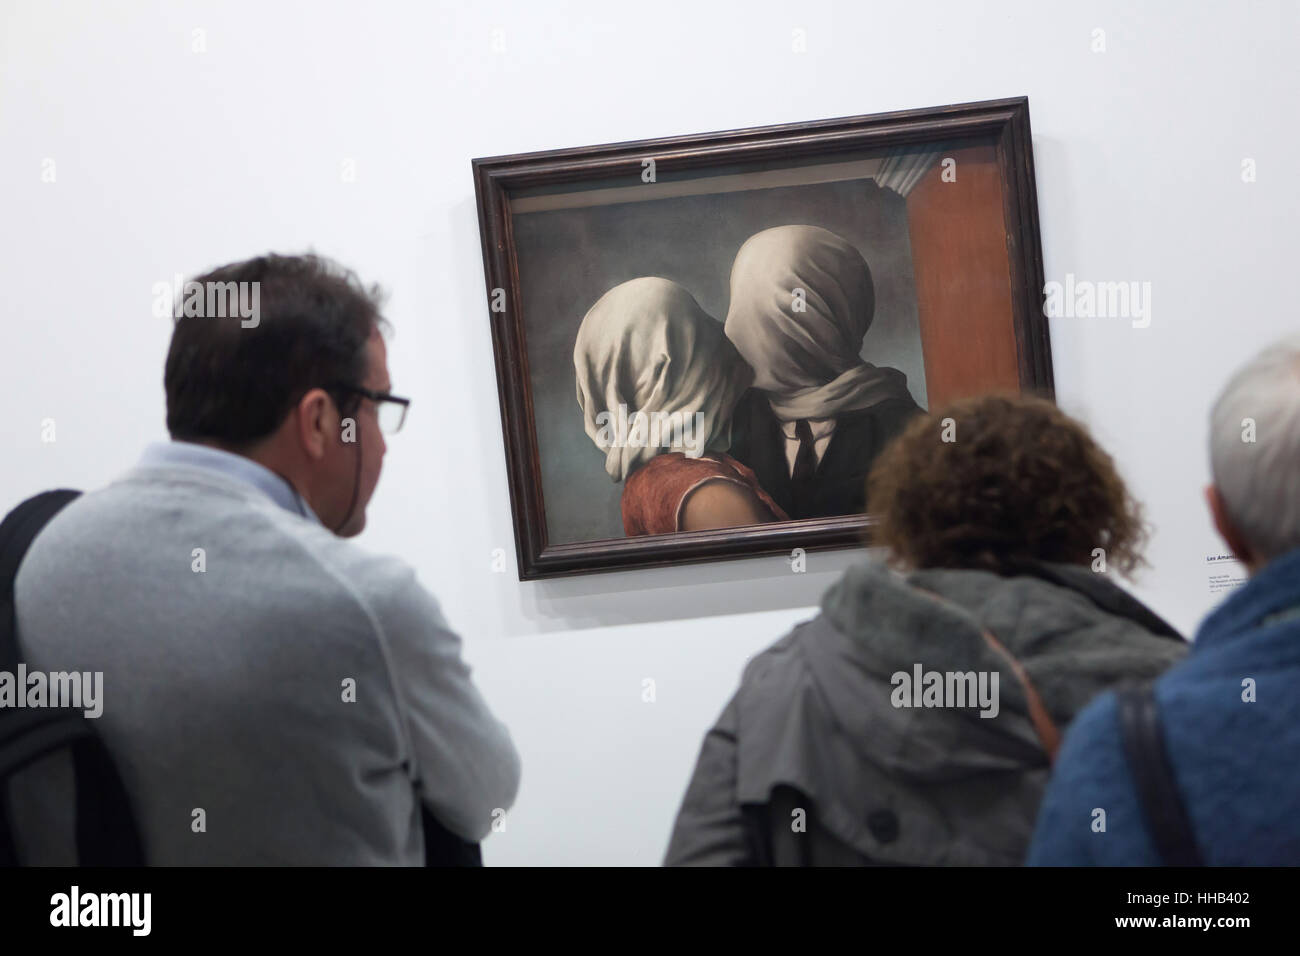 Visitors in front of the painting Les Amants (The Lovers, 1928) by Belgian surrealist artist Rene Magritte displayed at his retrospective exhibition in the Centre Pompidou in Paris, France. The exhibition entitled 'Rene Magritte. The Treachery of Images' runs till 23 January 2017. After that the reformulated version of the exhibition will be presented at the Schirn Kunsthalle in Frankfurt am Main, Germany, from 10 February to 5 June 2017. Stock Photo